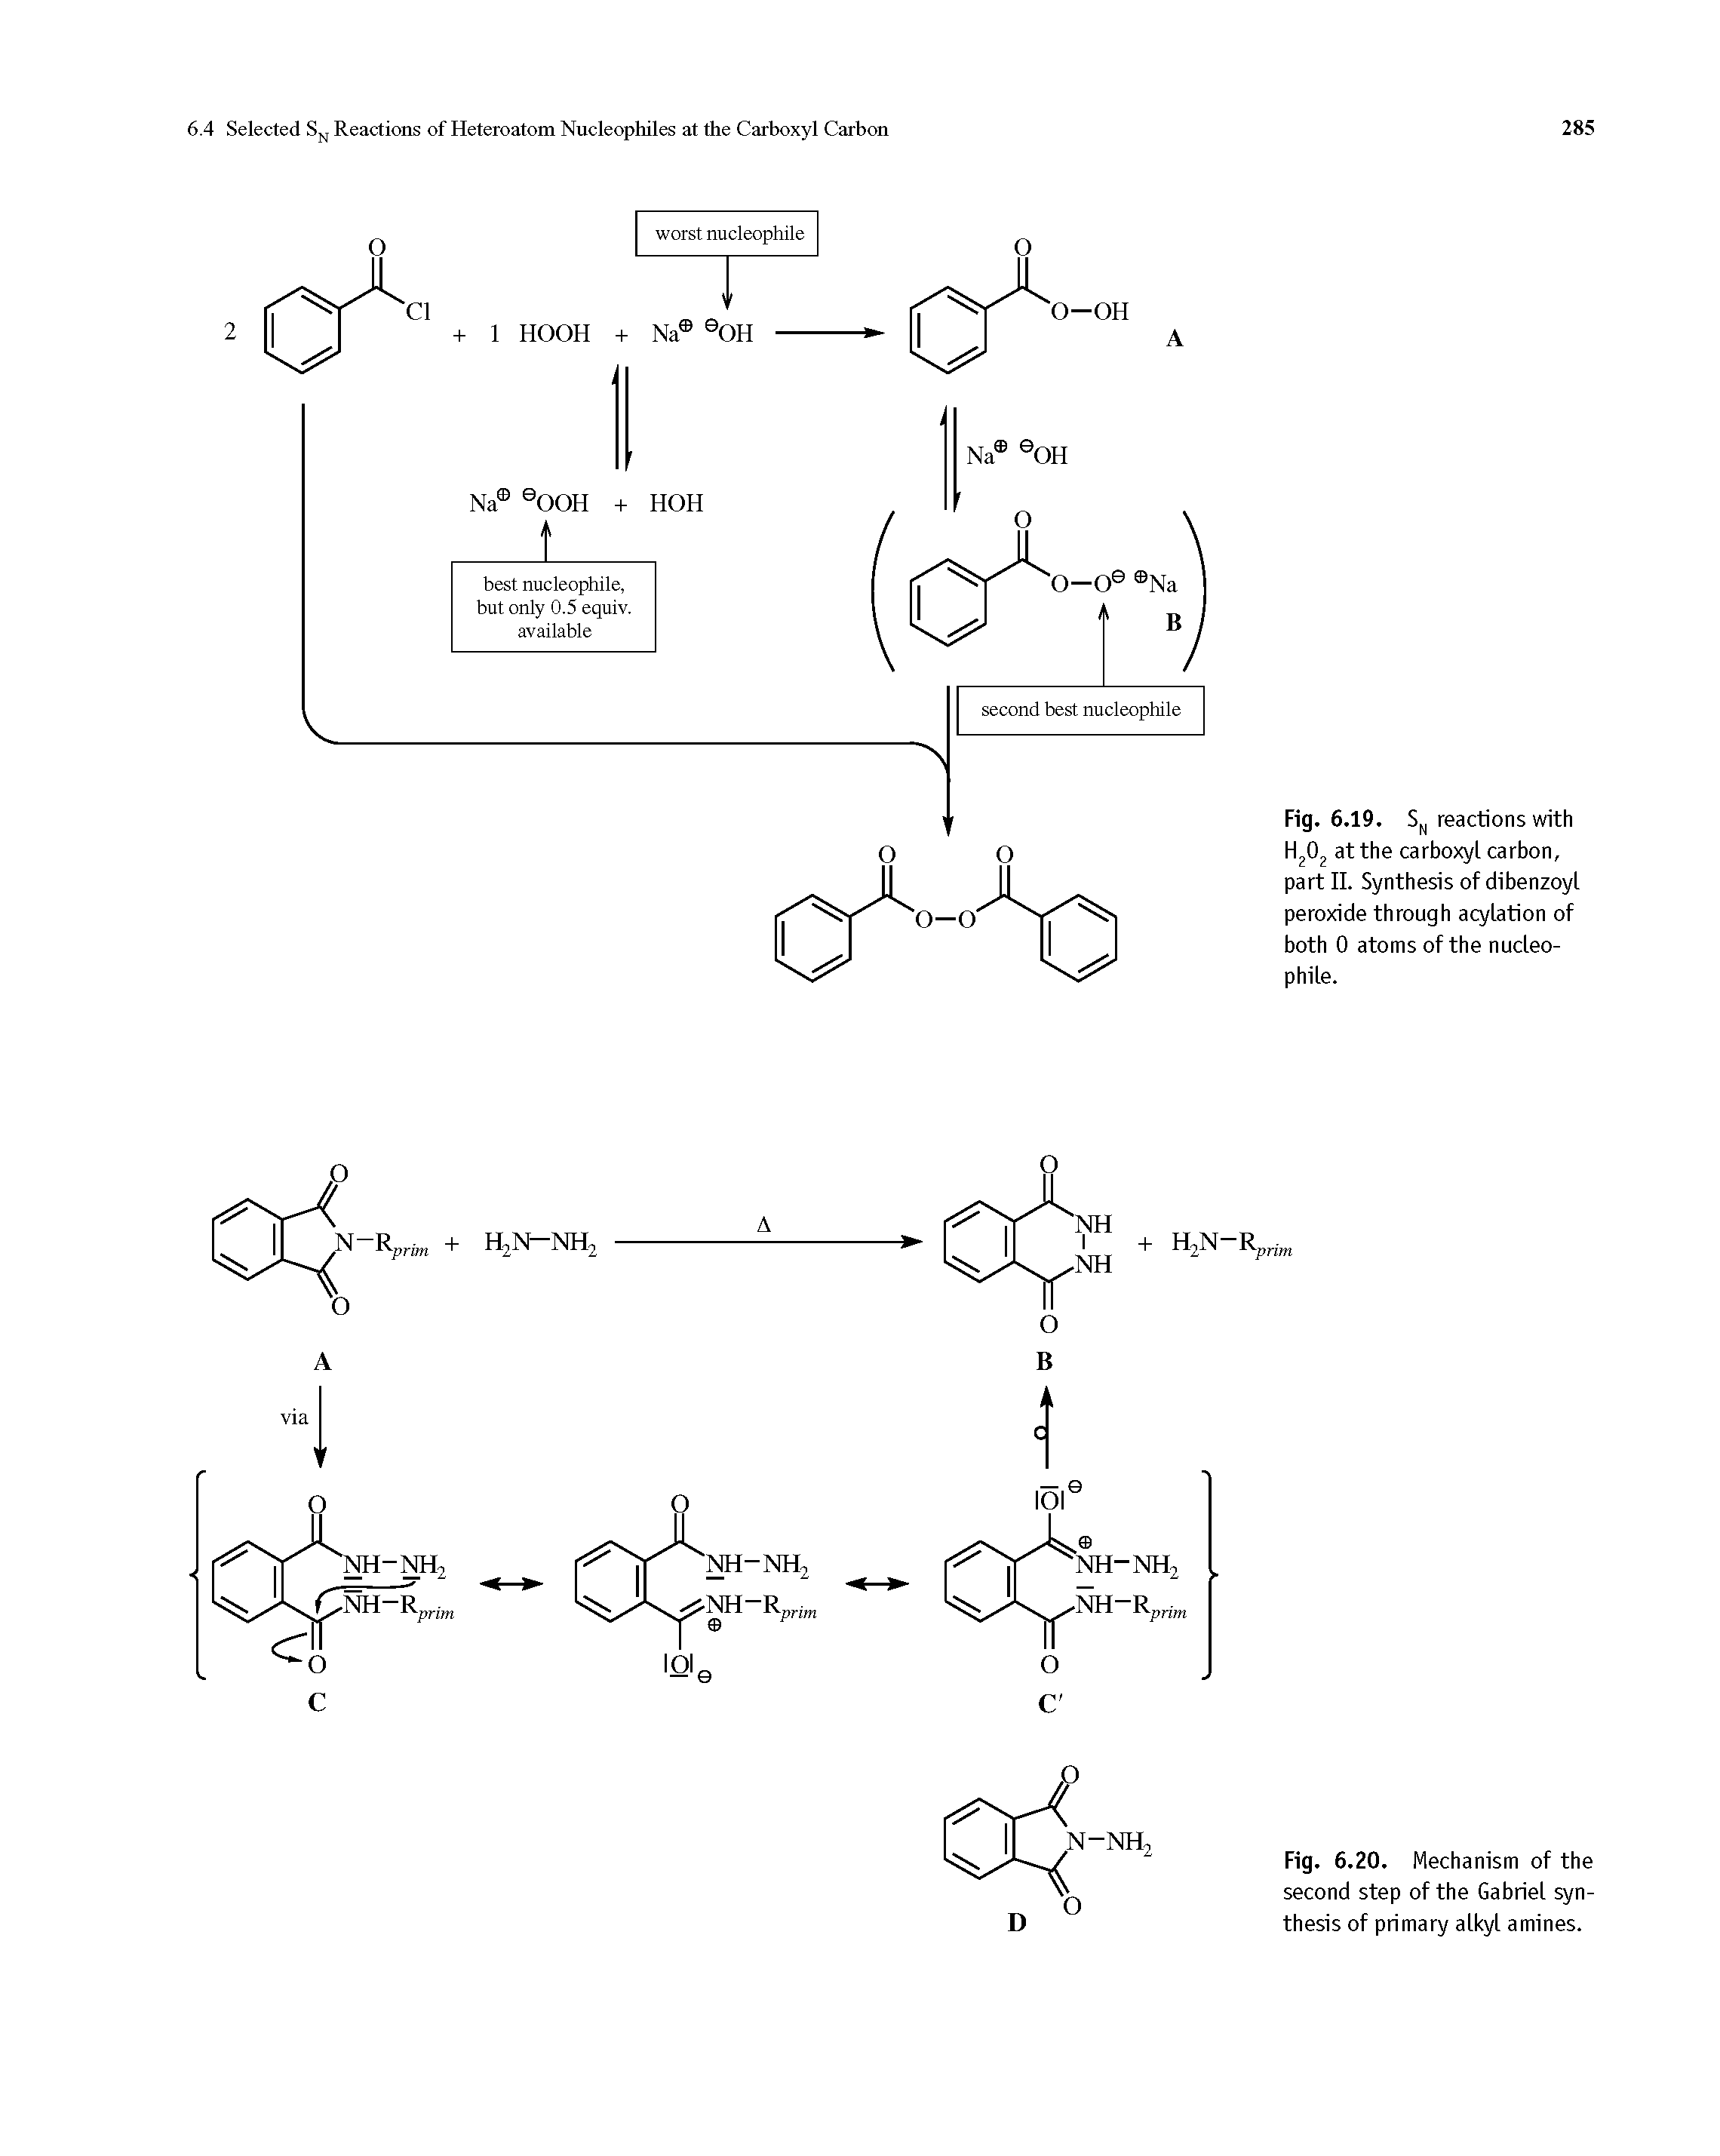 Fig. 6.20. Mechanism of the second step of the Gabriel synthesis of primary alkyl amines.